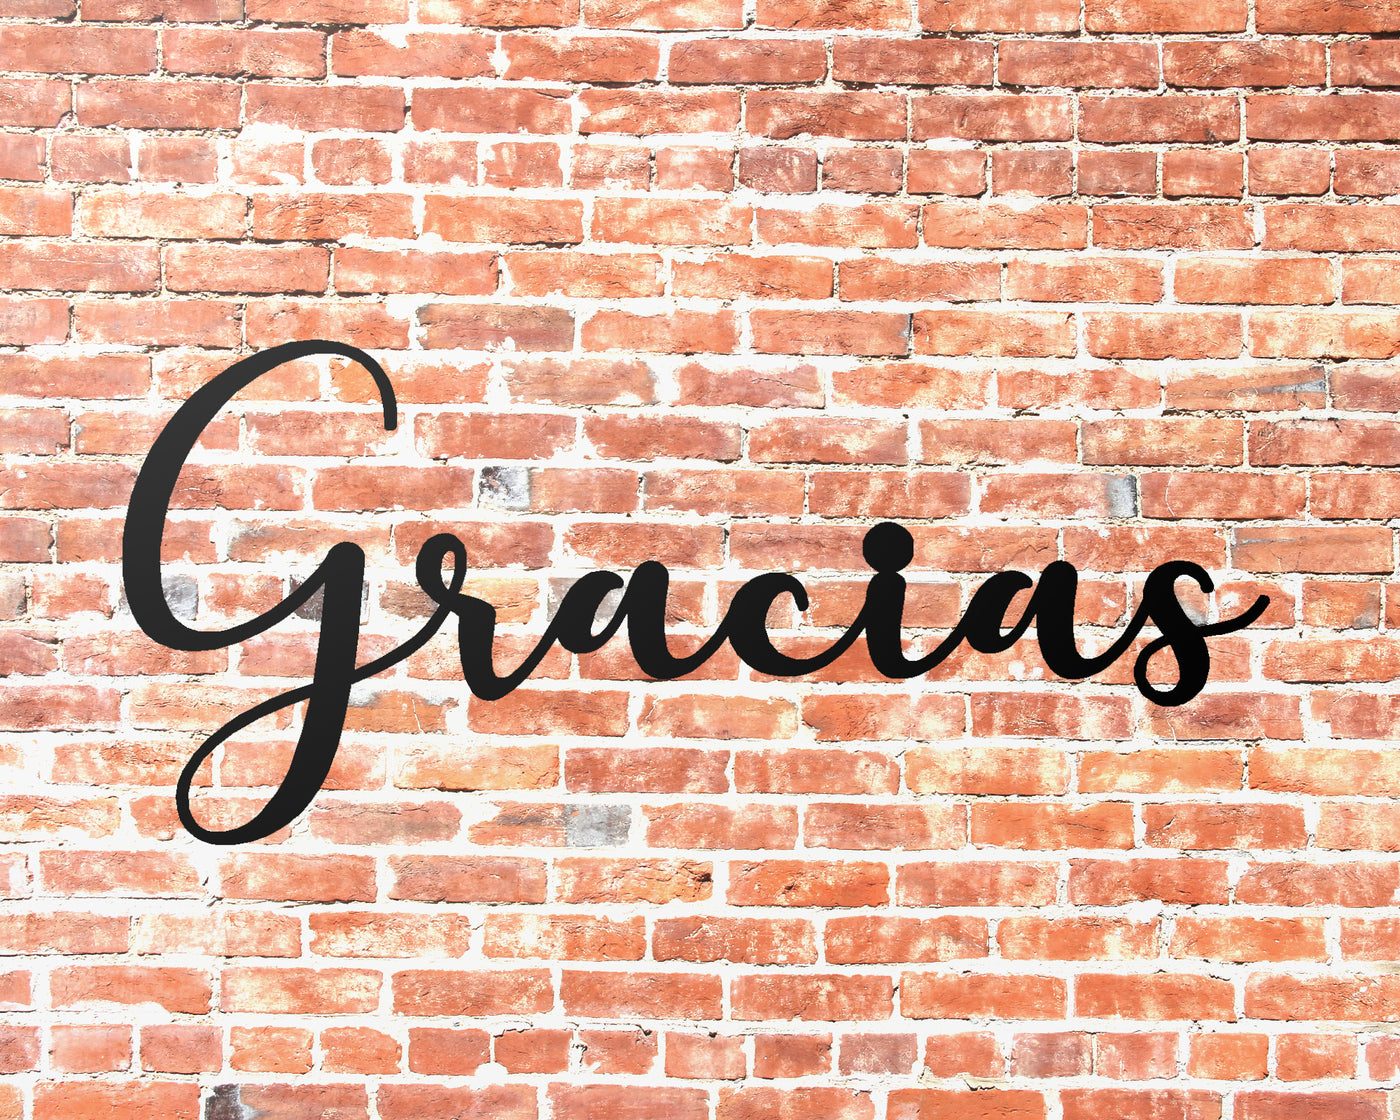 Gracias Metal Word Sign - Madison Iron and Wood - Metal Word Art - metal outdoor decor - Steel deocrations - american made products - veteran owned business products - fencing decorations - fencing supplies - custom wall decorations - personalized wall signs - steel - decorative post caps - steel post caps - metal post caps - brackets - structural brackets - home improvement - easter - easter decorations - easter gift - easter yard decor